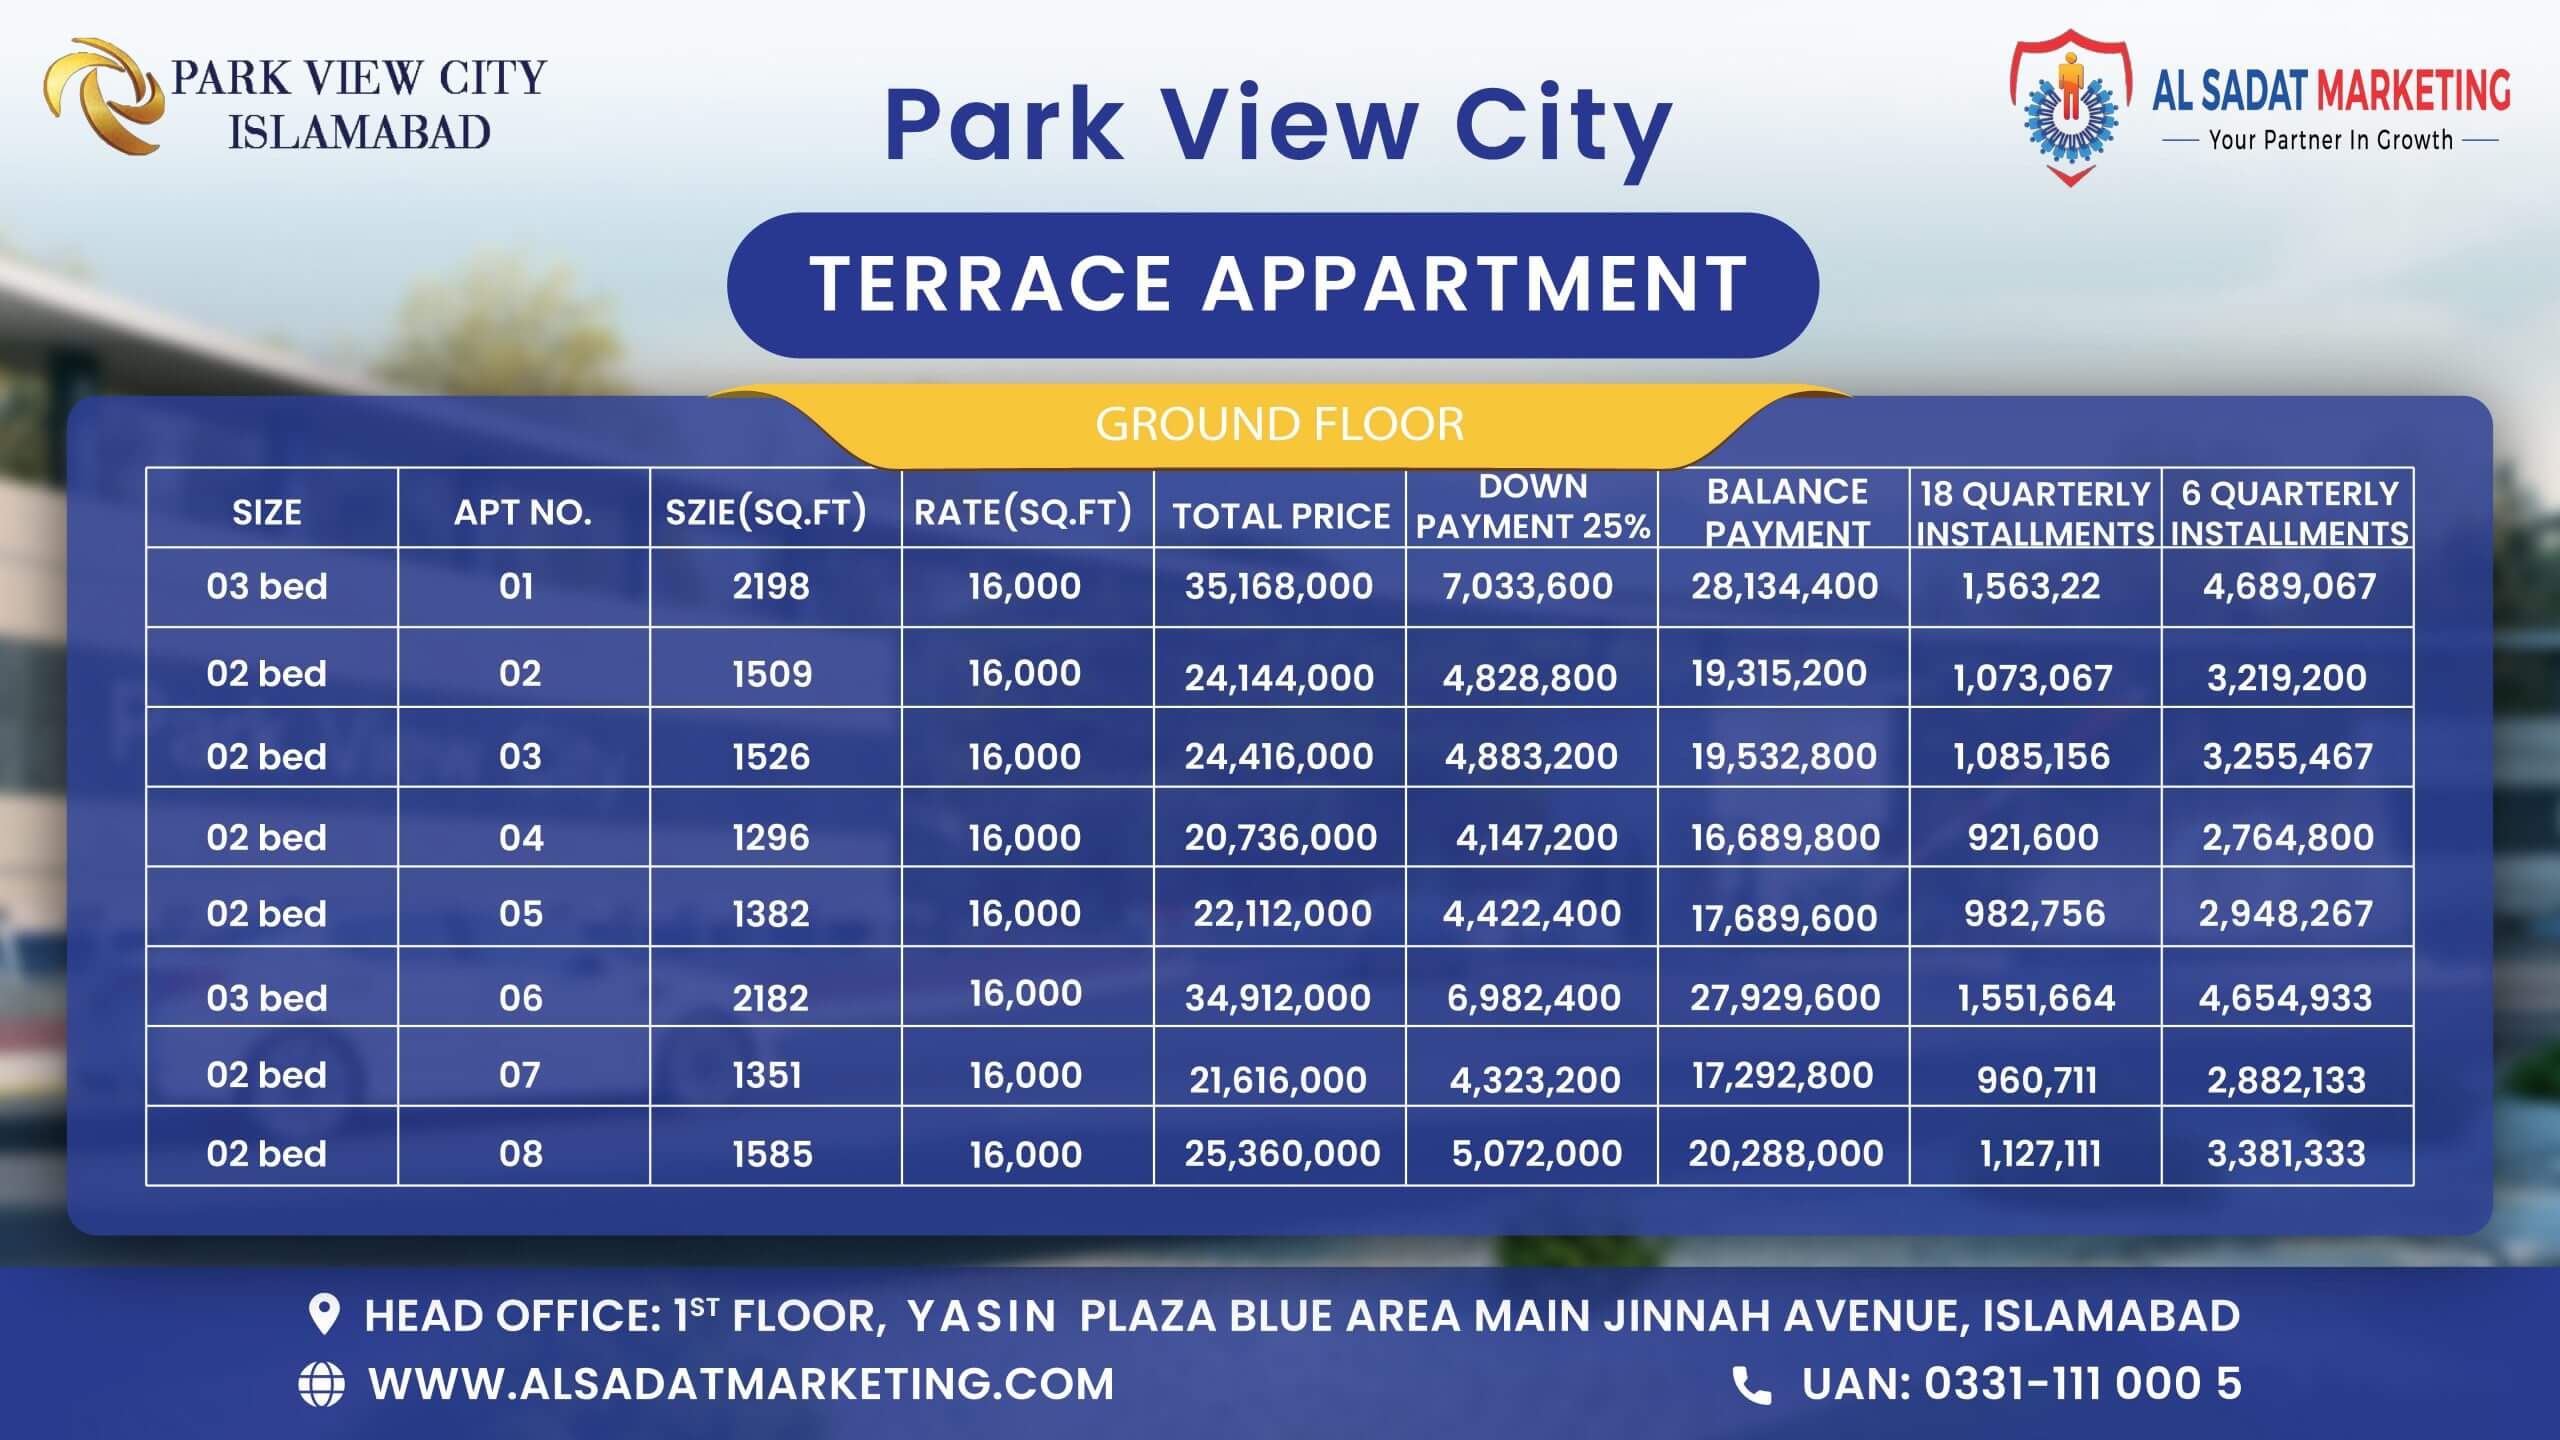 park view city islamabad terrace apartments ground floor payment plan - park view city terrace apartments ground floor payment plan - park view city islamabad terrace apartments payment plan - park view city terrace apartments payment plan - park view city islamabad payment plan - park view city payment plan - payment plan of park view city islamabad – payment plan of park view city – park view city islamabad – park view city – park view city housing society - park view city islamabad housing society – park view city real estate project - park view city islamabad real estate project - al sadat marketing - alsadat marketing - al-sadat marketing